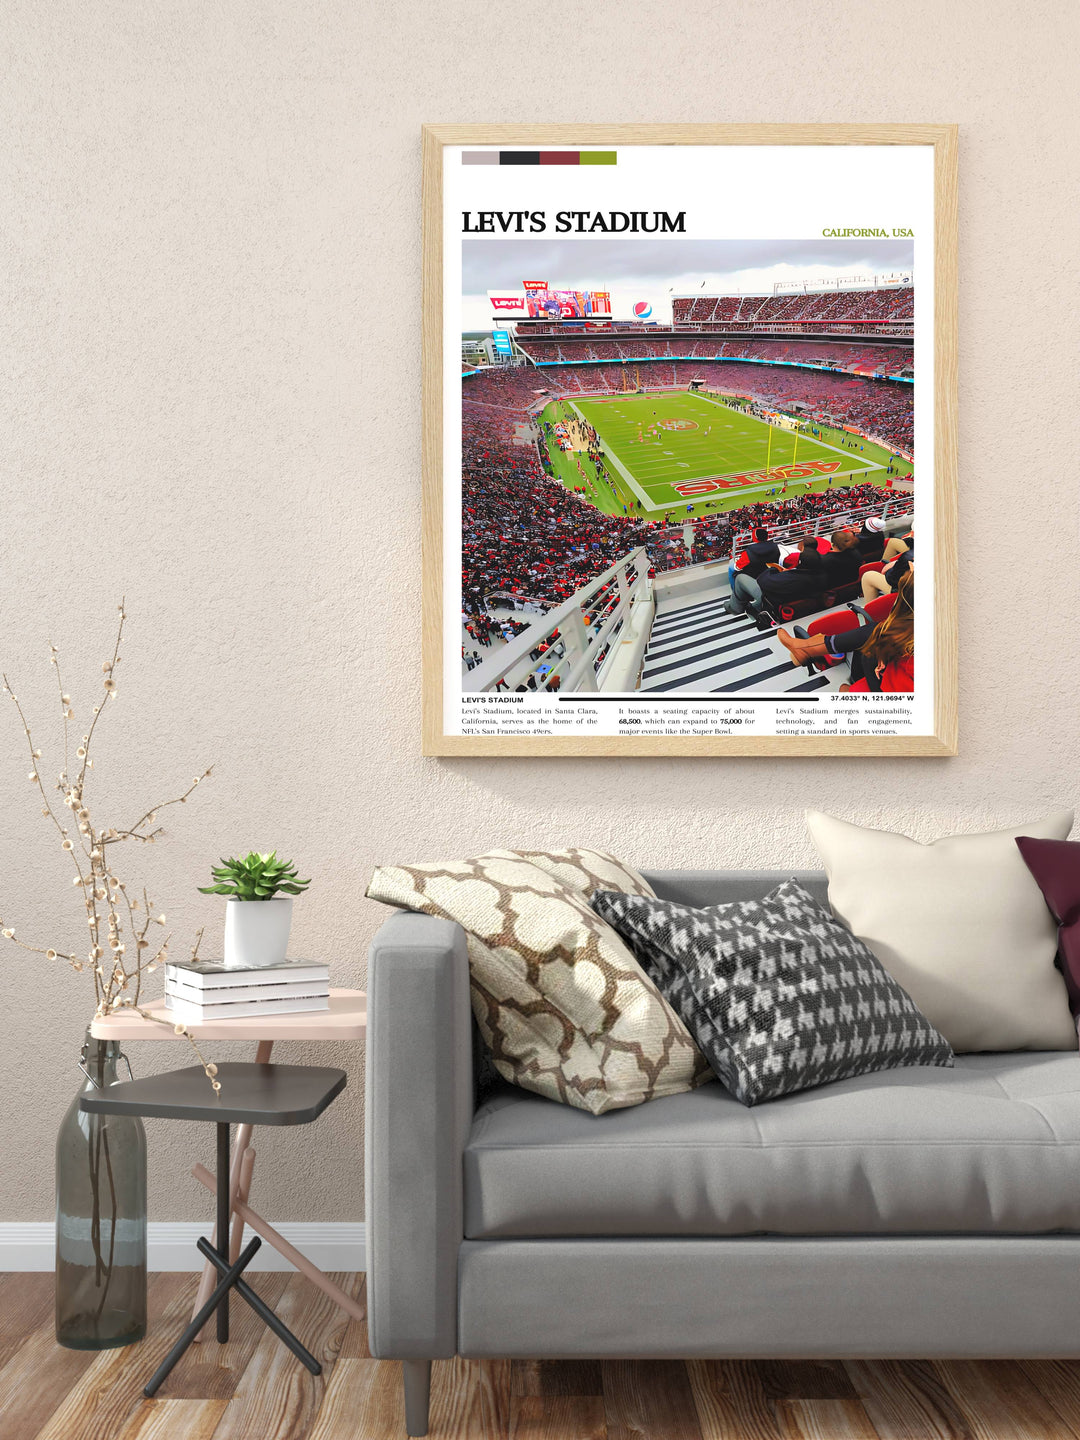 Eye-catching San Francisco 49ers poster depicting the iconic Levi Stadium, perfect for adding a touch of NFL magic to any room, with a vivid display of team colors and fan excitement.